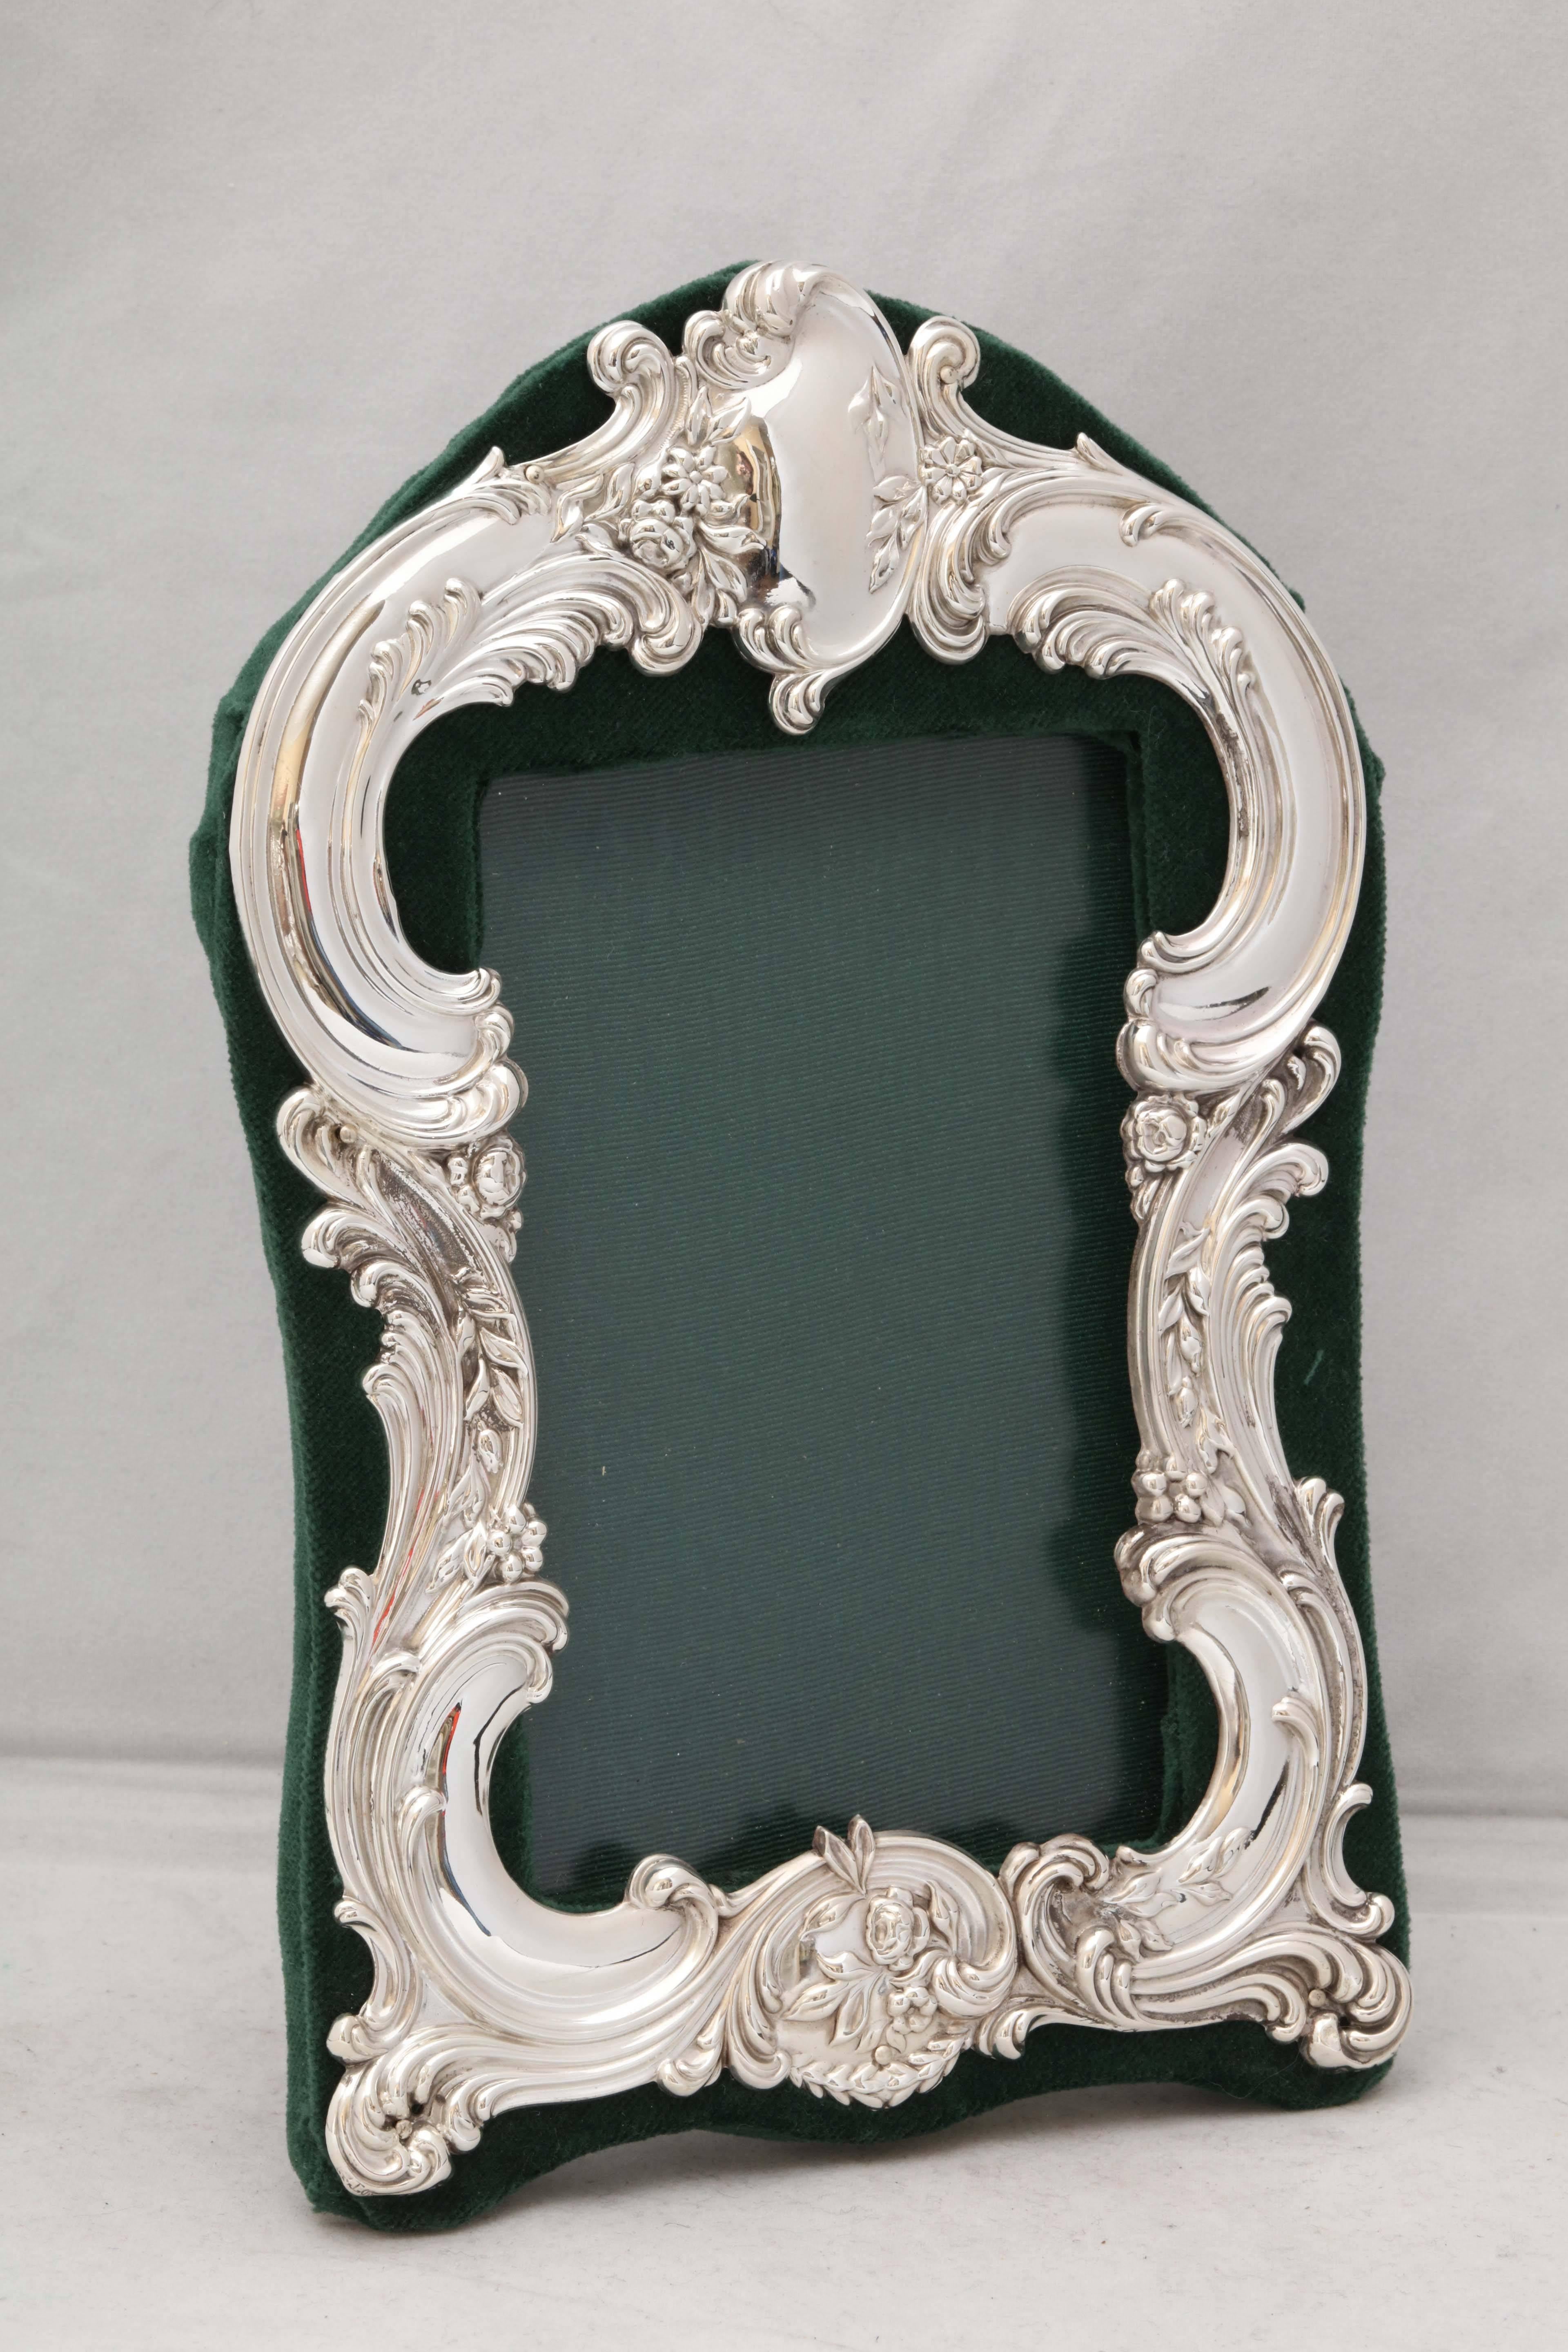 Victorian, sterling silver picture frame mounted on dark green velvet, The Gorham Manufacturing Corp., Providence, Rhode Island, circa 1895. Vacant cartouche; lovely swirls and flowers. Measures: 5 3/4